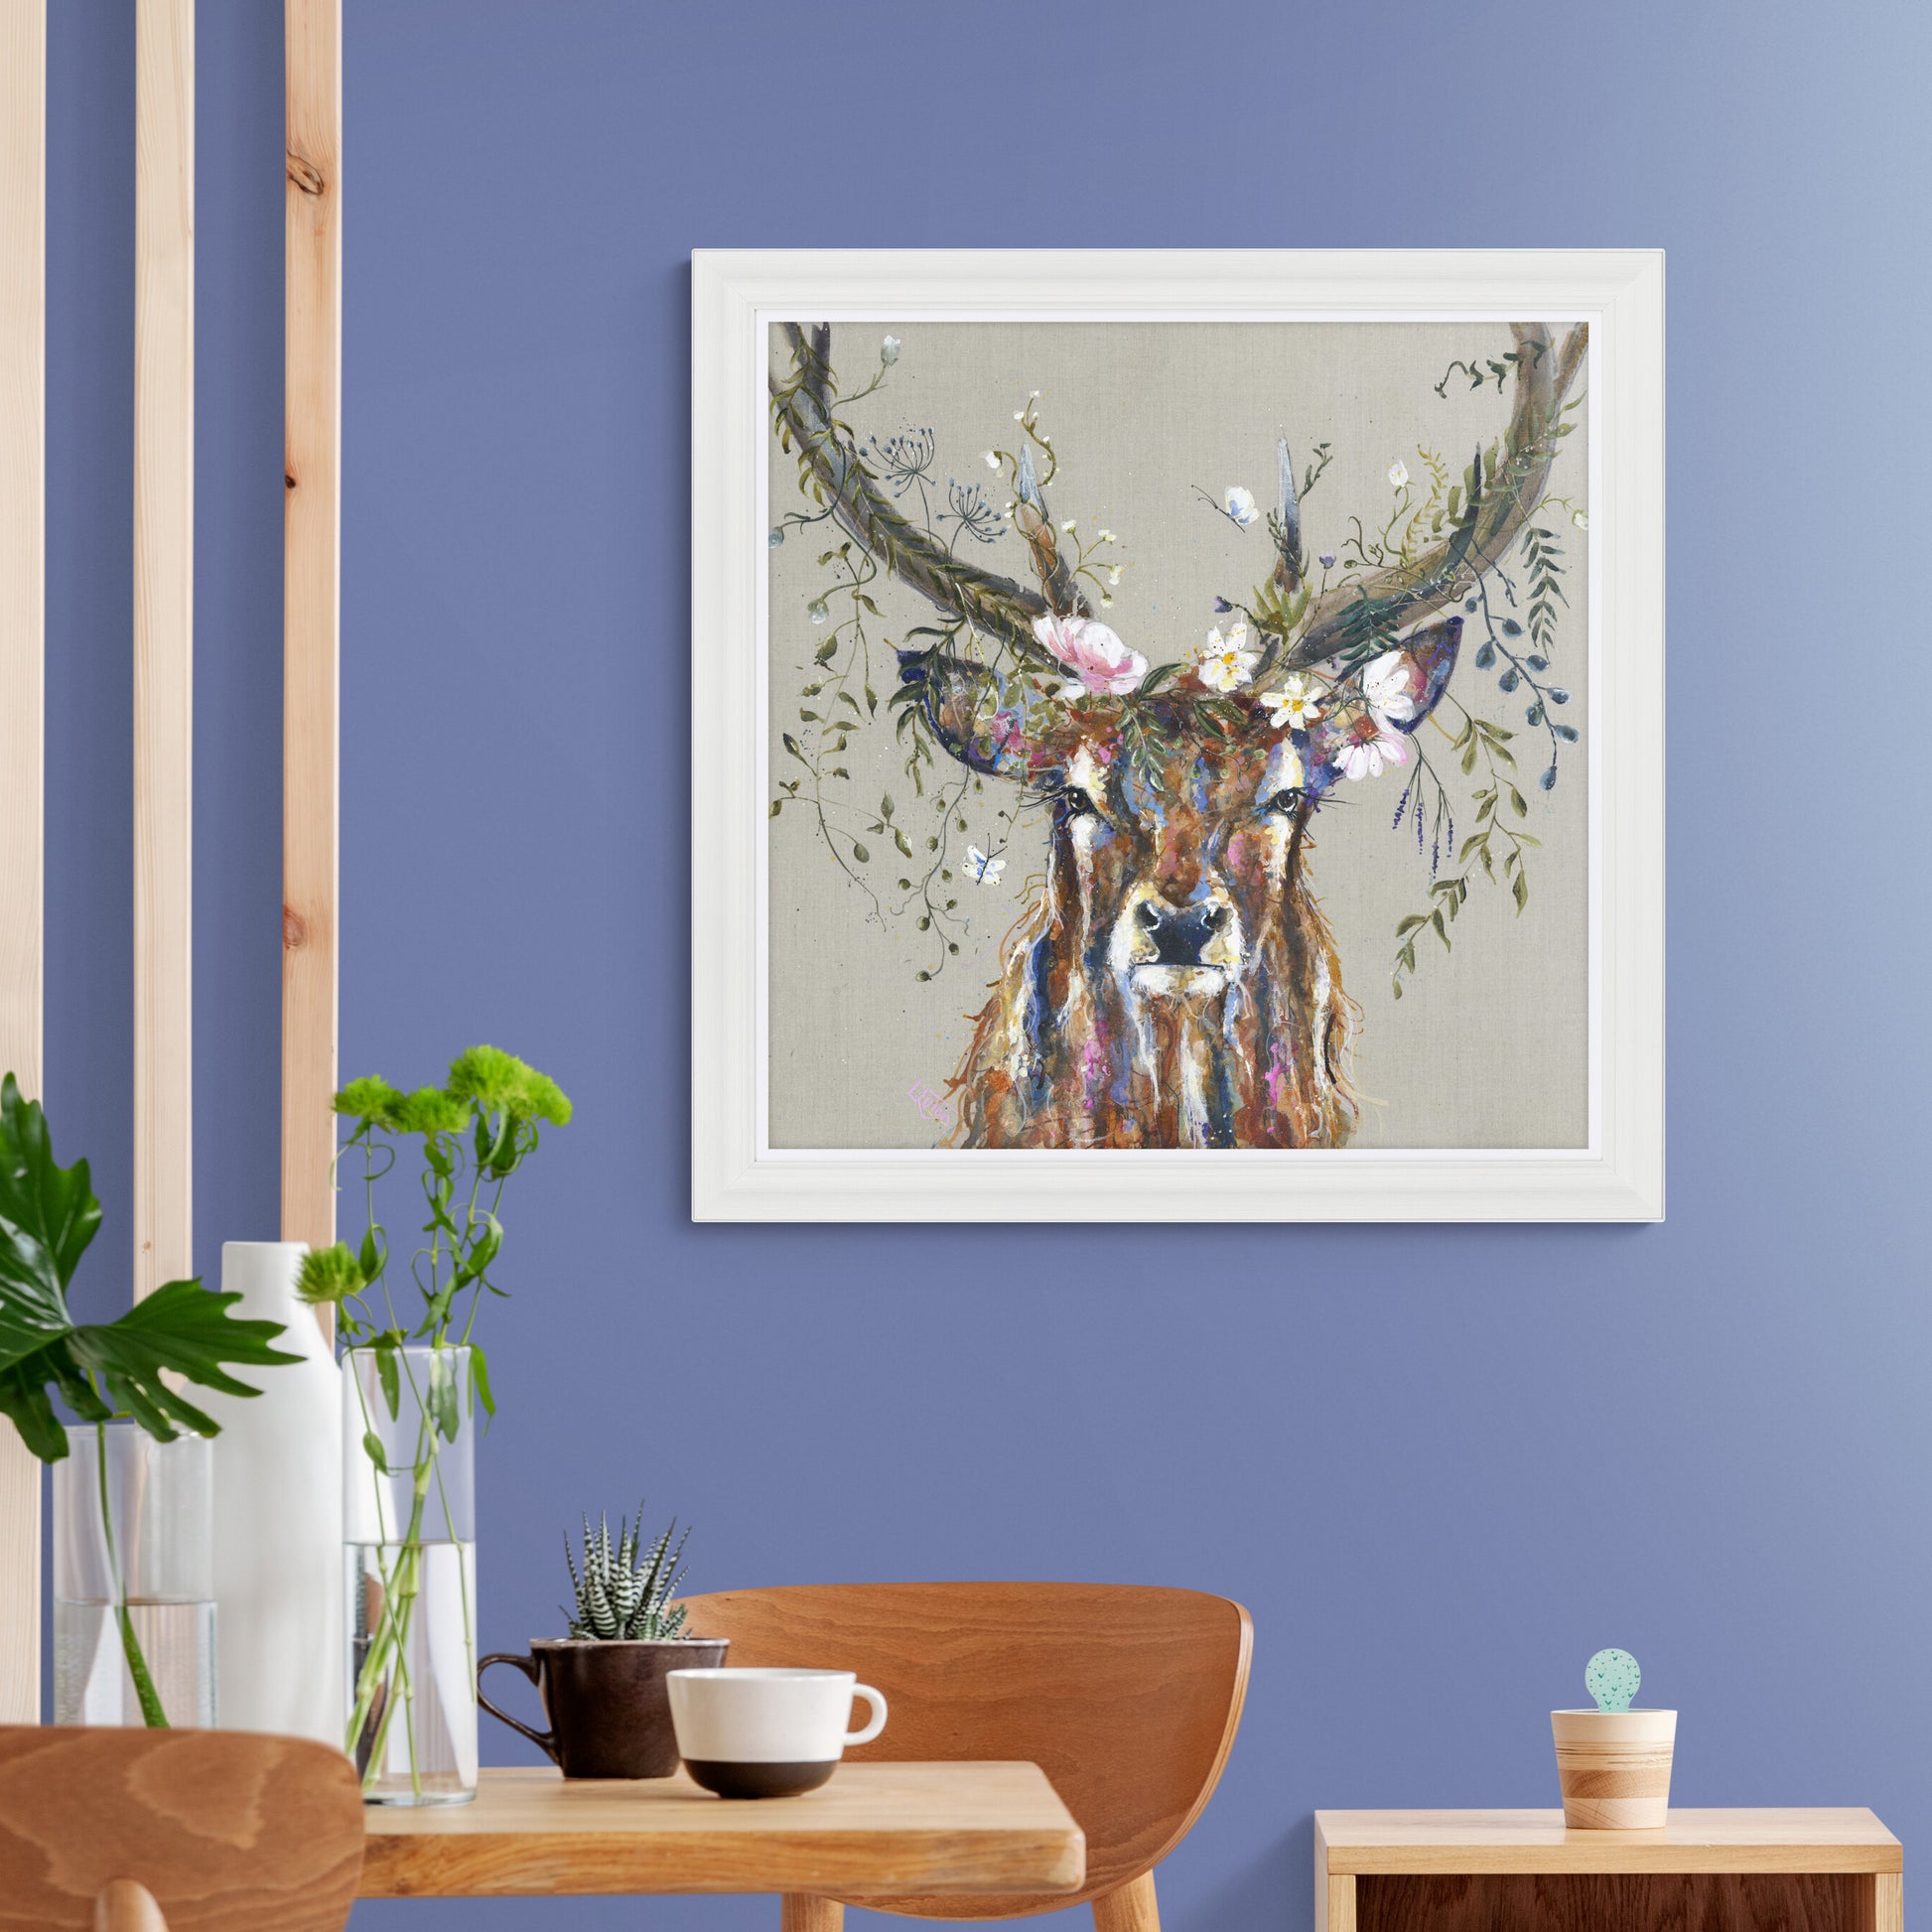 Oberon framed print by Louise Luton